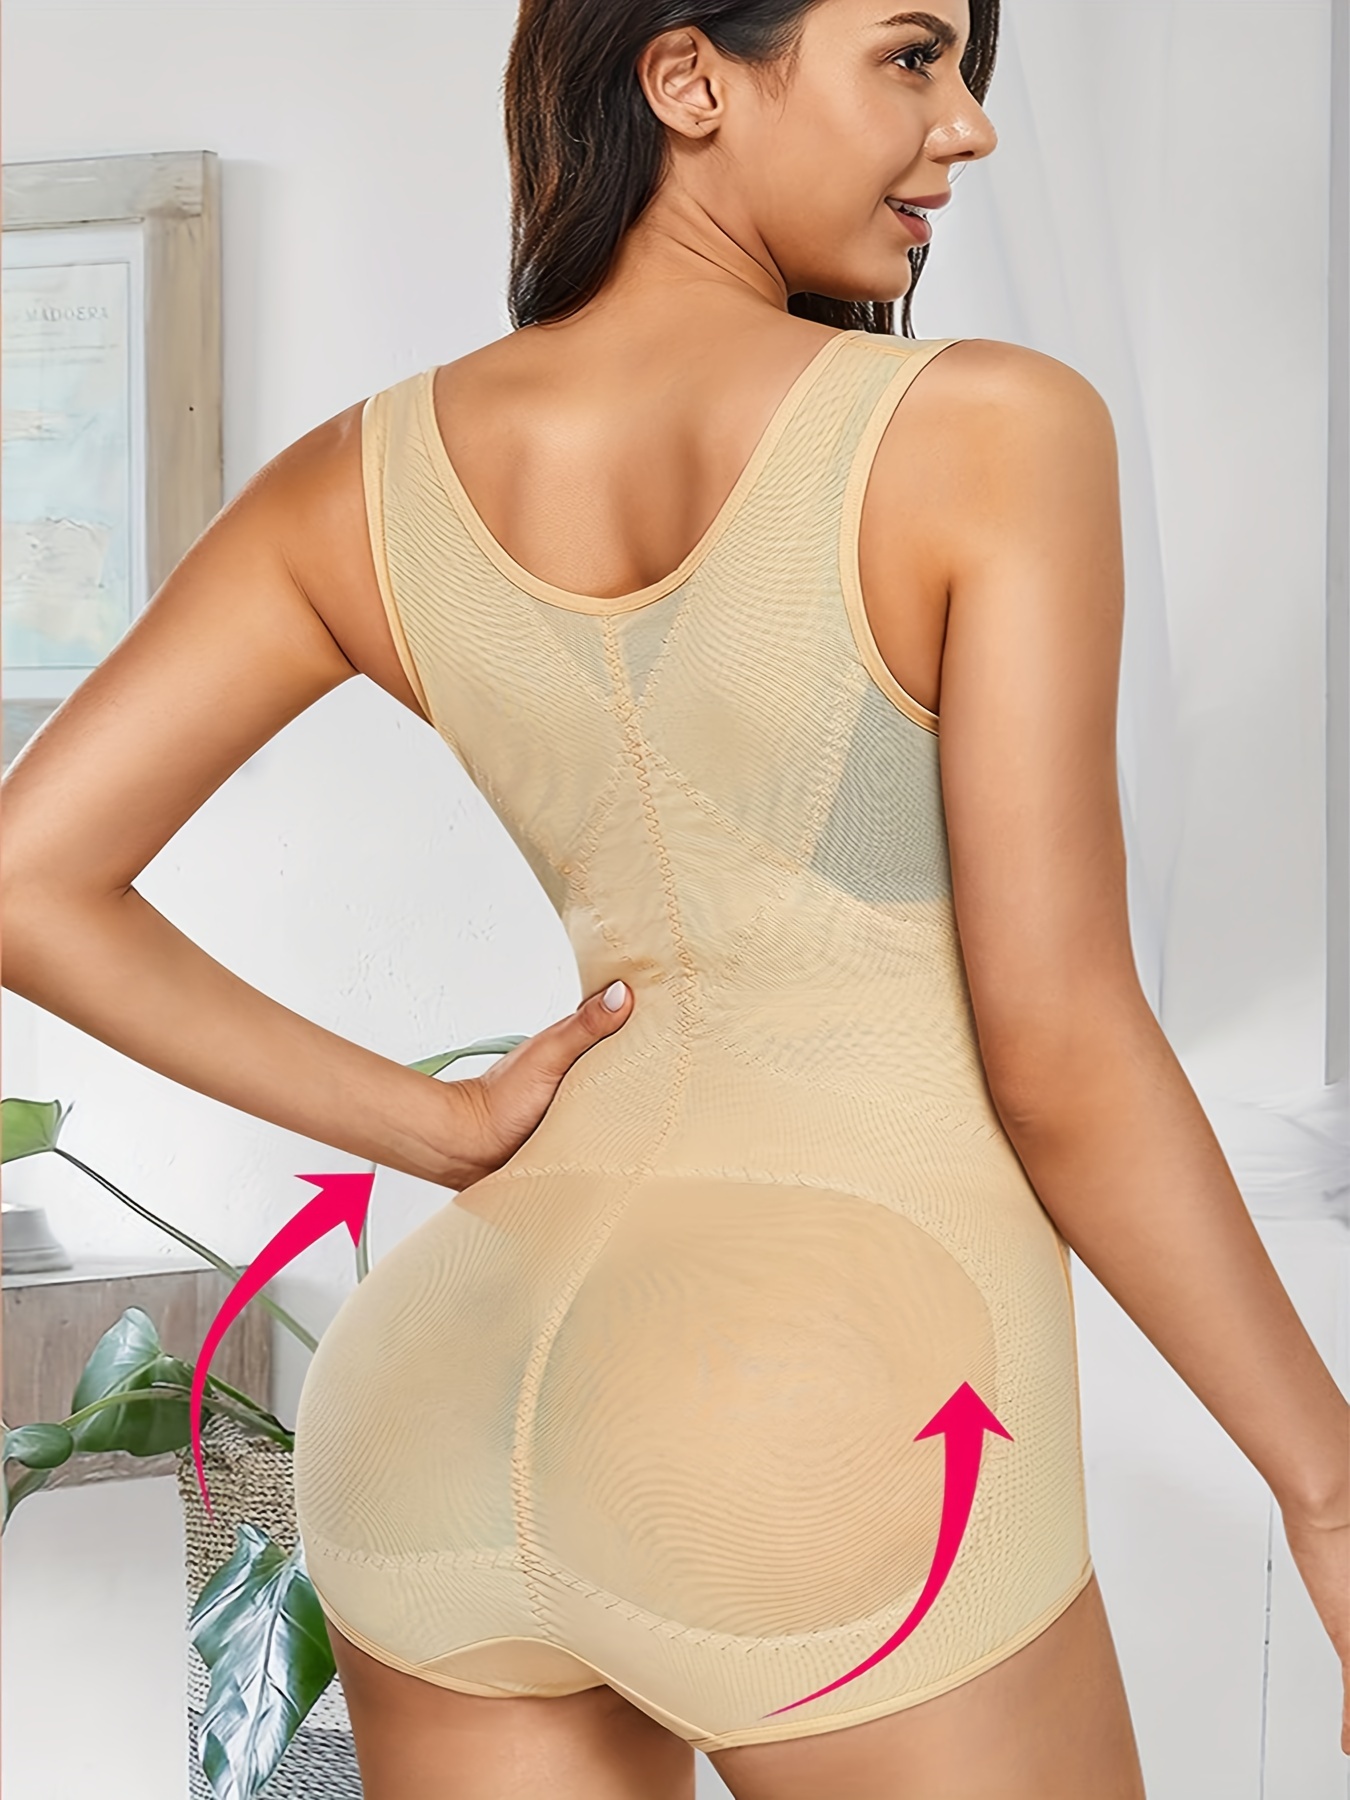 ZOPEUSI Bodysuit Shapewear for Women - Tummy Control, Slimming Body Shaper  with V Neck, Built-in Bra, and Butt Lifter